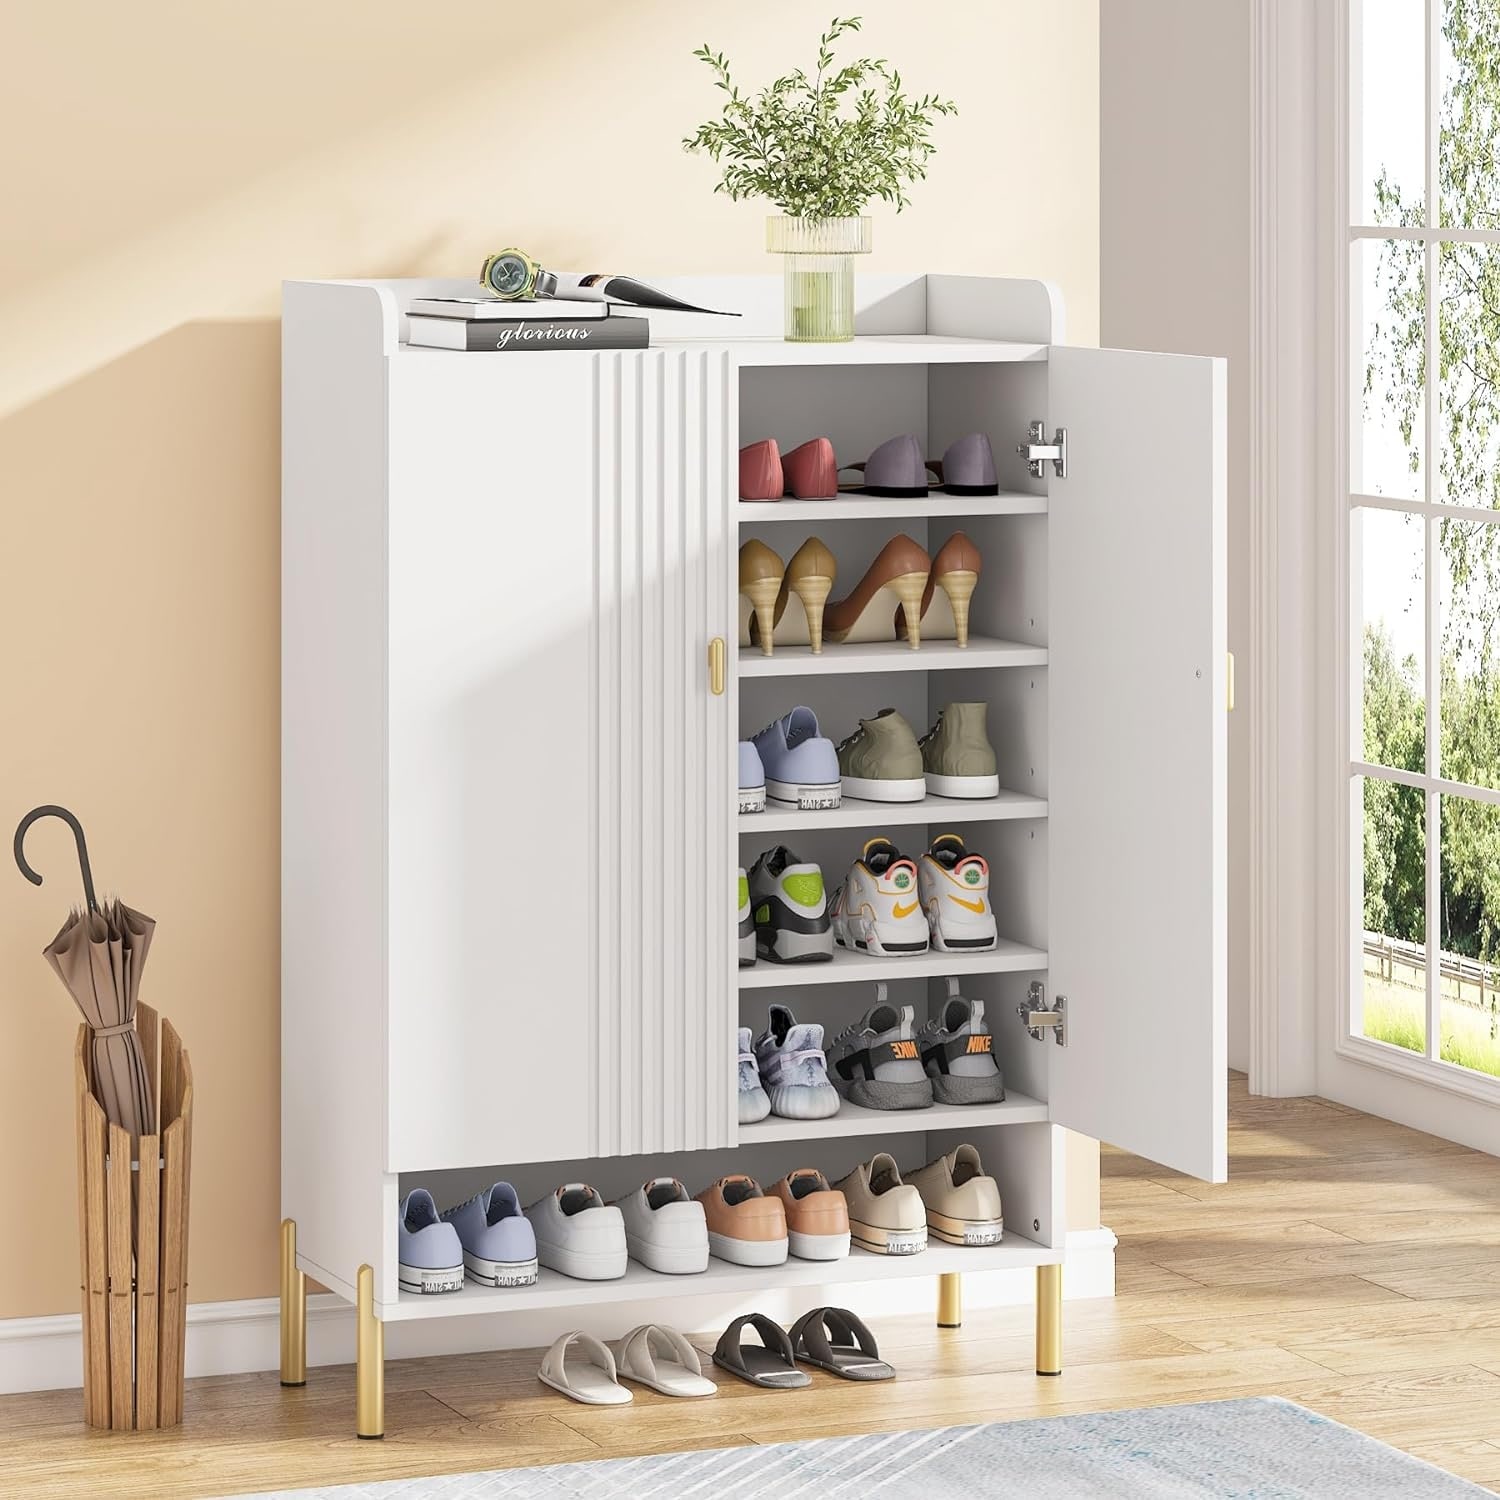 https://ak1.ostkcdn.com/images/products/is/images/direct/f65d77403027e9a35a24cf707552f504617df21a/Shoe-Cabinet-Storage-Entryway%2C-Slim-6-Tier-Shoe-Organizer-Cabinet.jpg